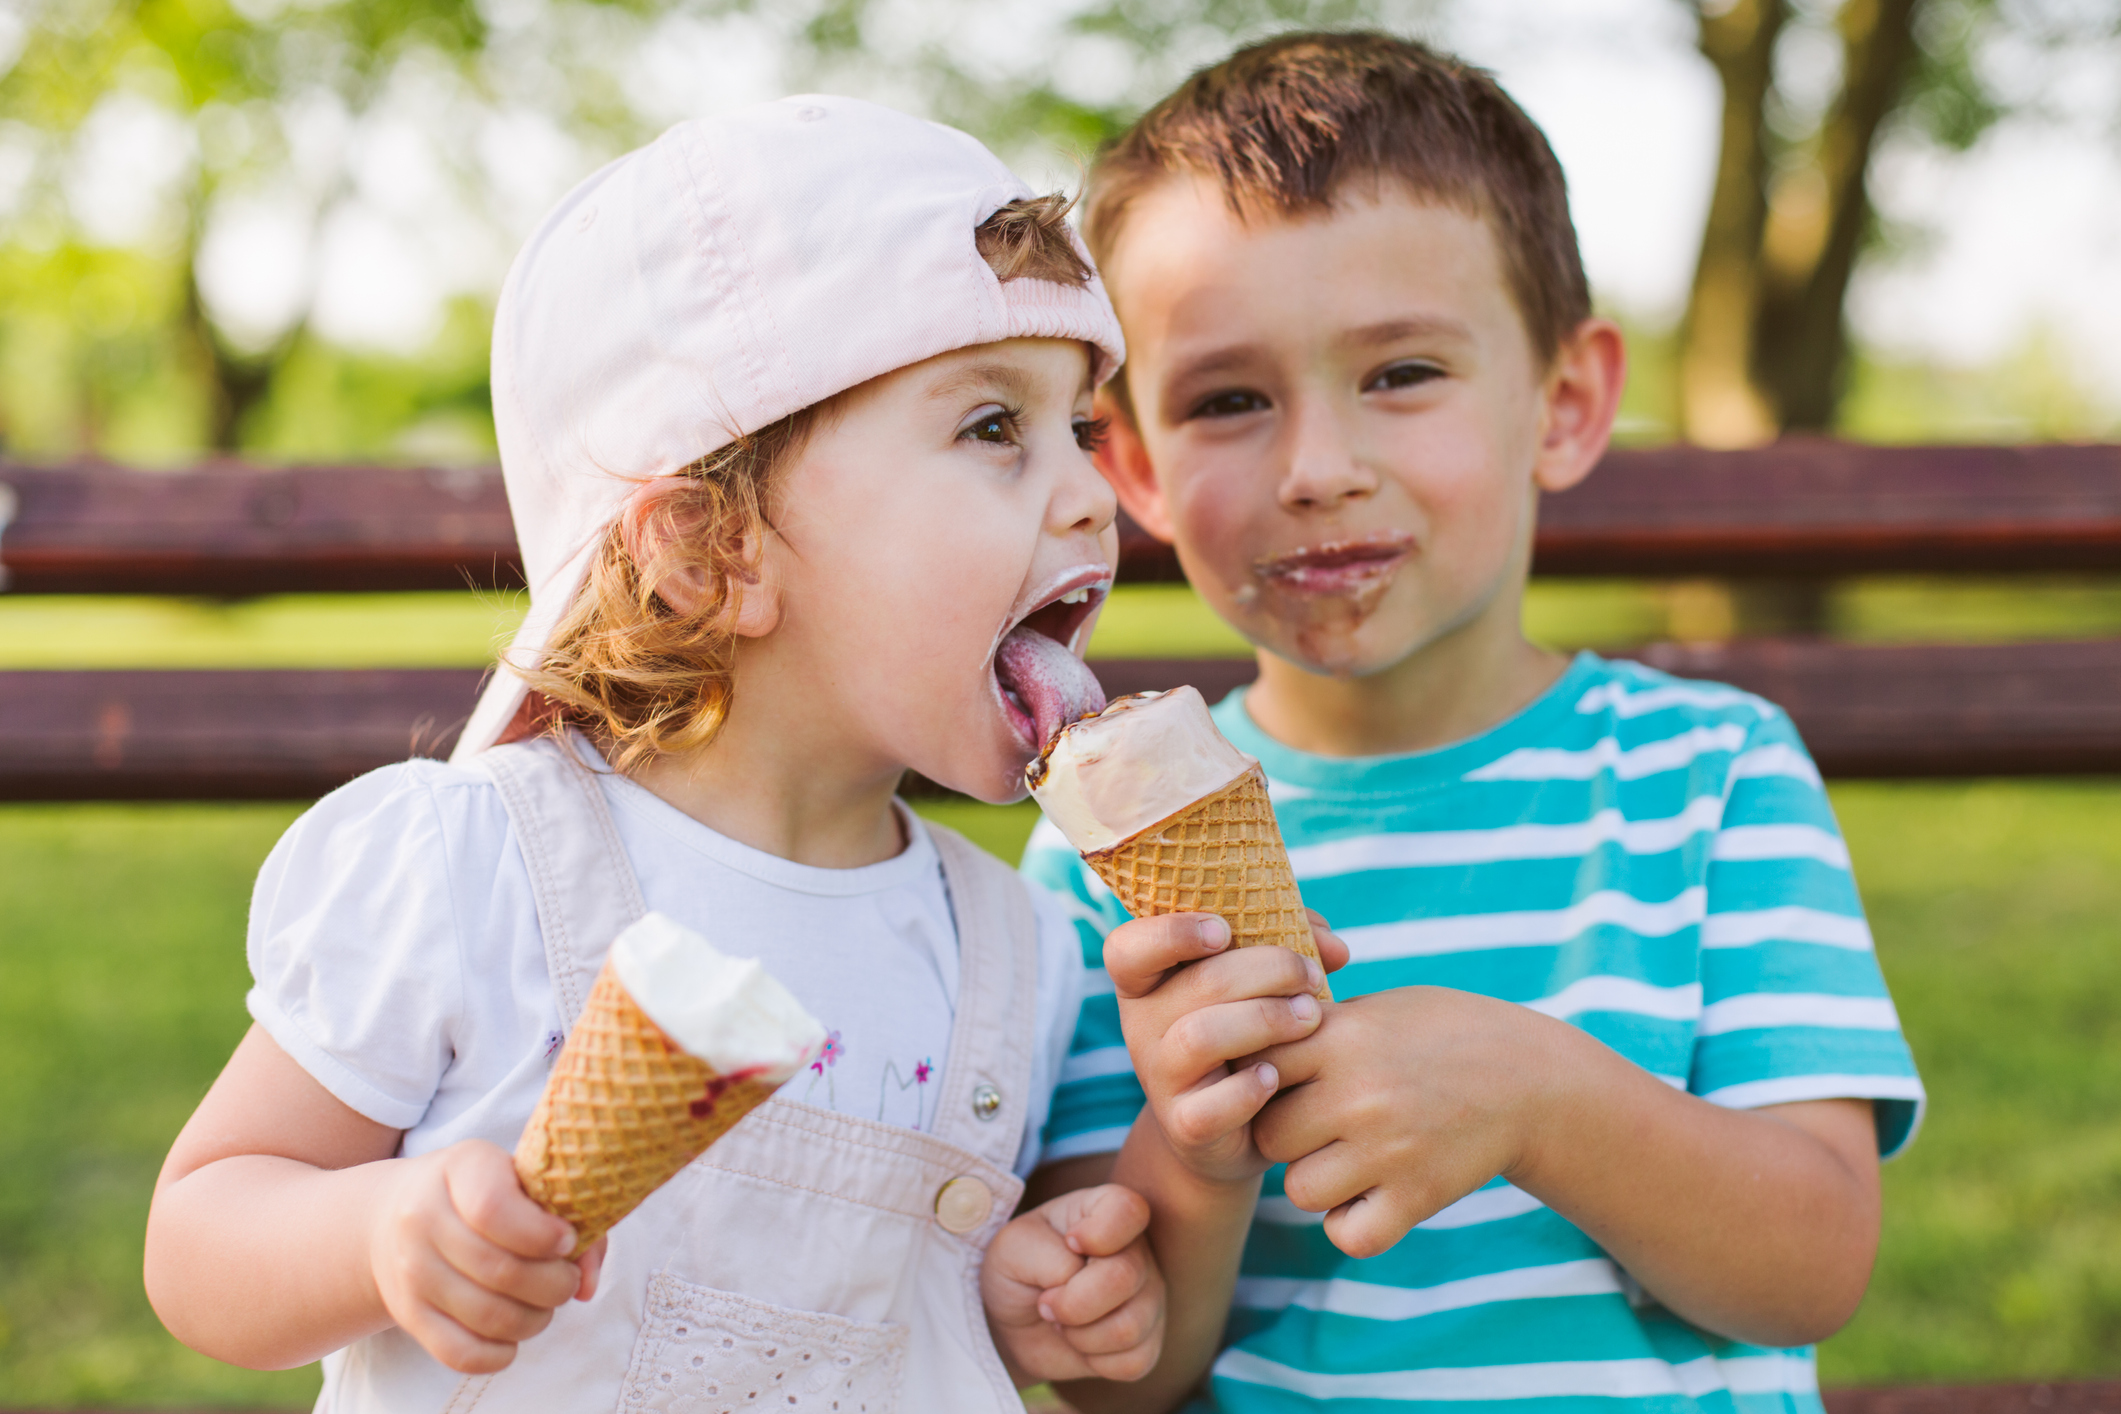 boy share ice cream with his sister